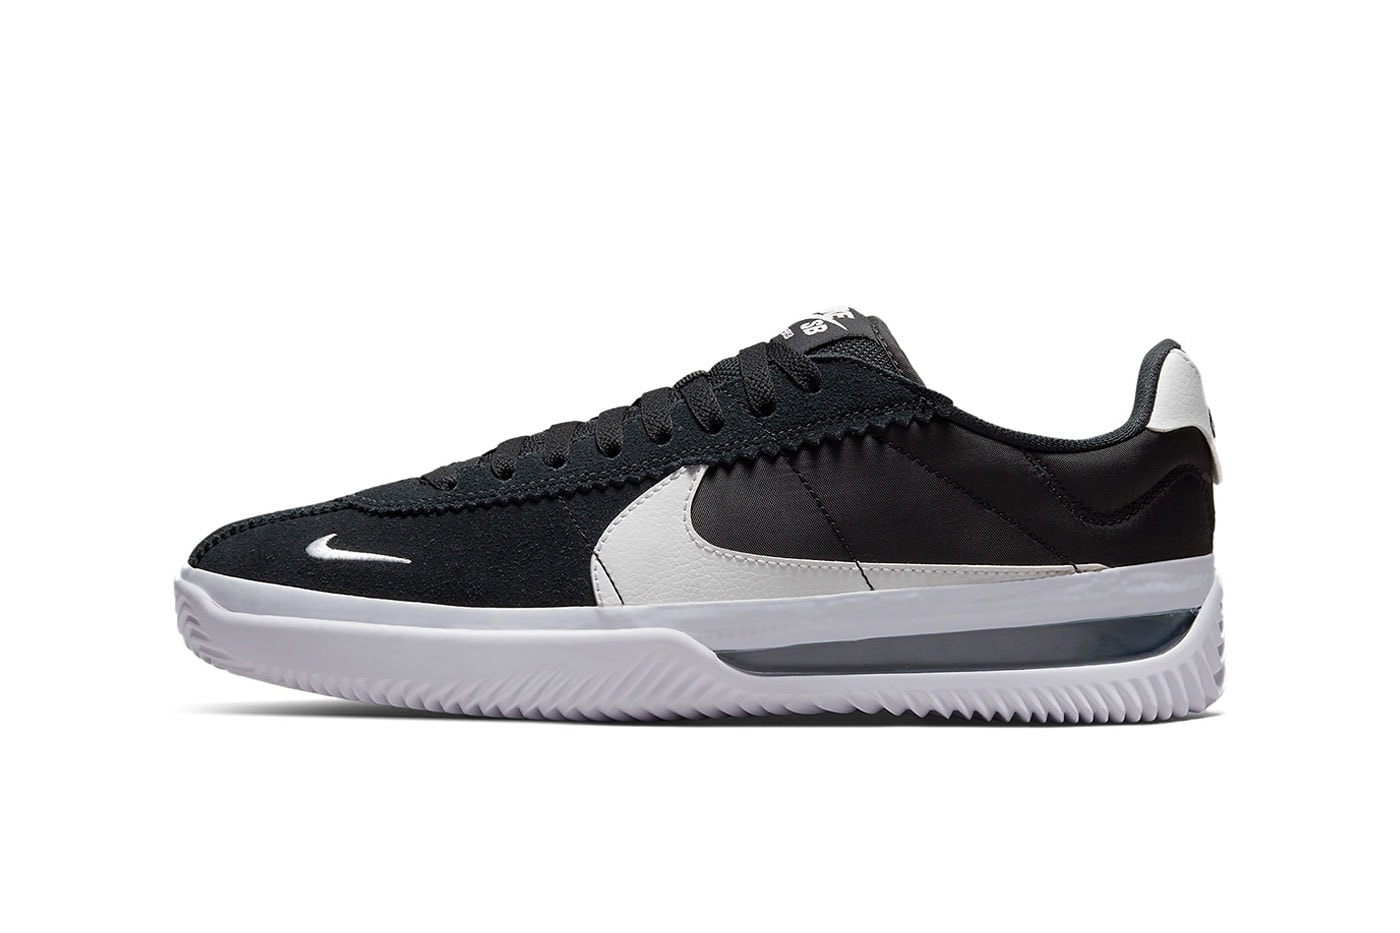 New Blue Ribbon SB Is Inspired by the Cortez Silhouette | Hypebeast